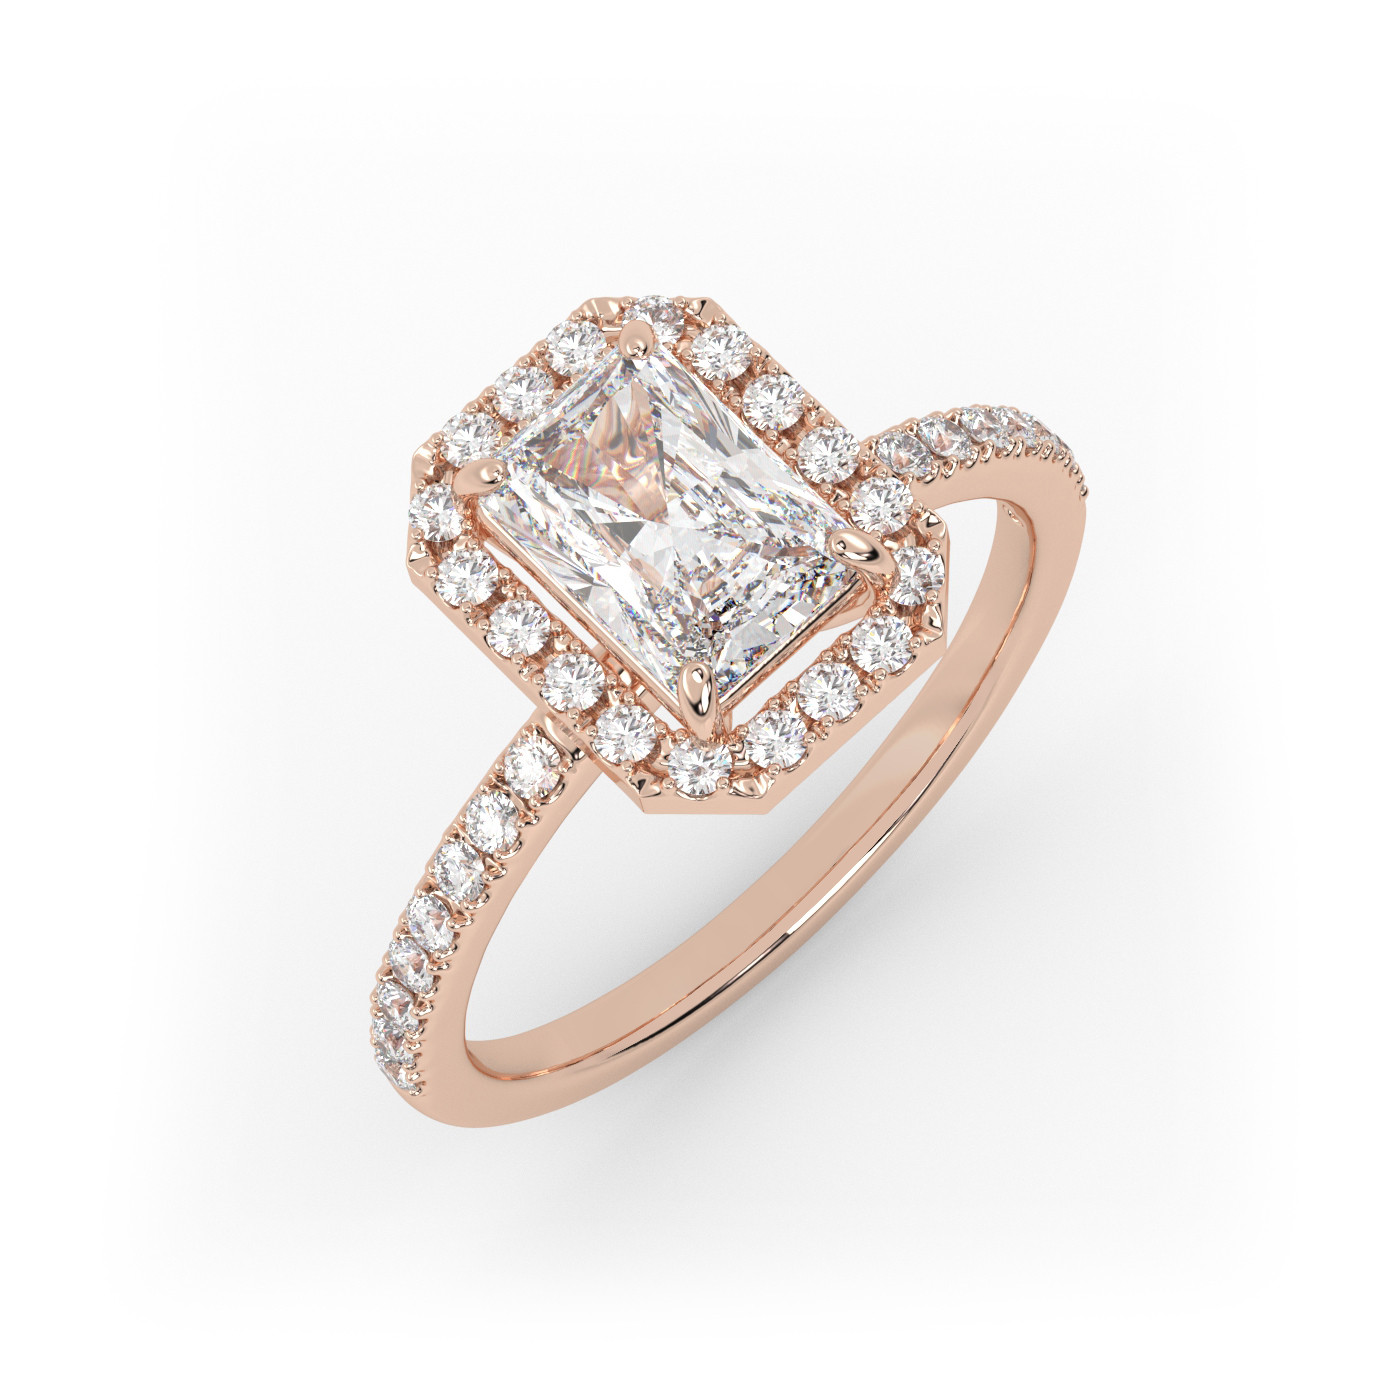 18K ROSE GOLD Radiant Cut Diamond engagement Ring with Halo and Pave style